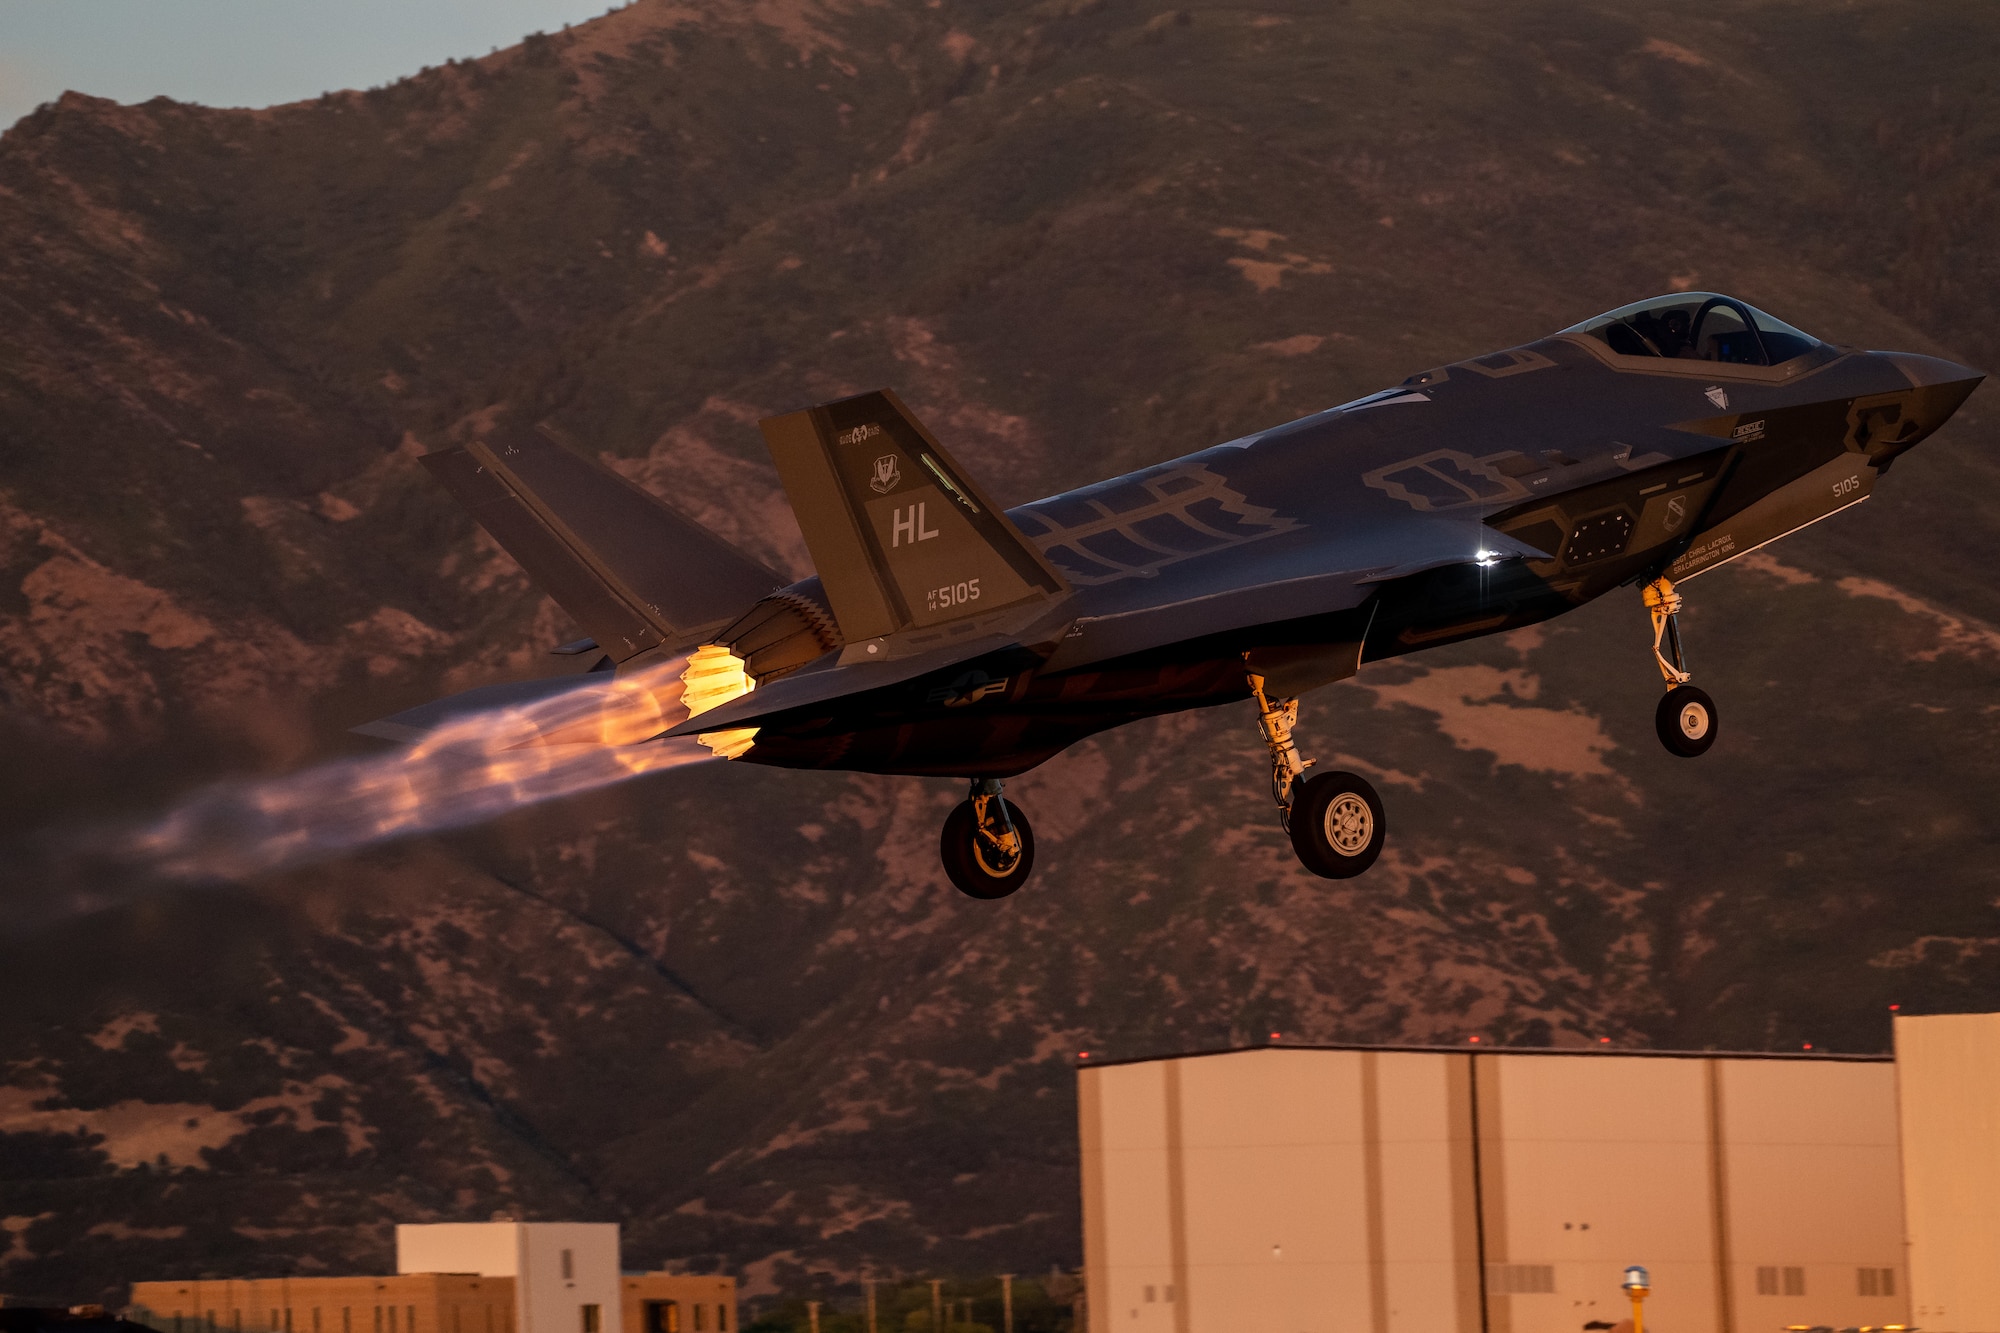 An F-35A takes off from Hill Air Force Base, Utah, the evening of Aug. 20, 2019, as the active duty 388th and reserve 419th Fighter Wings conducted local night flying operations. The wings are required to train at night to maintain their readiness and all-weather capabilities. Increased flying also provides a valuable opportunity to evaluate aircraft maintenance resiliency and operational agility. (U.S. Air Force photo by R. Nial Bradshaw)